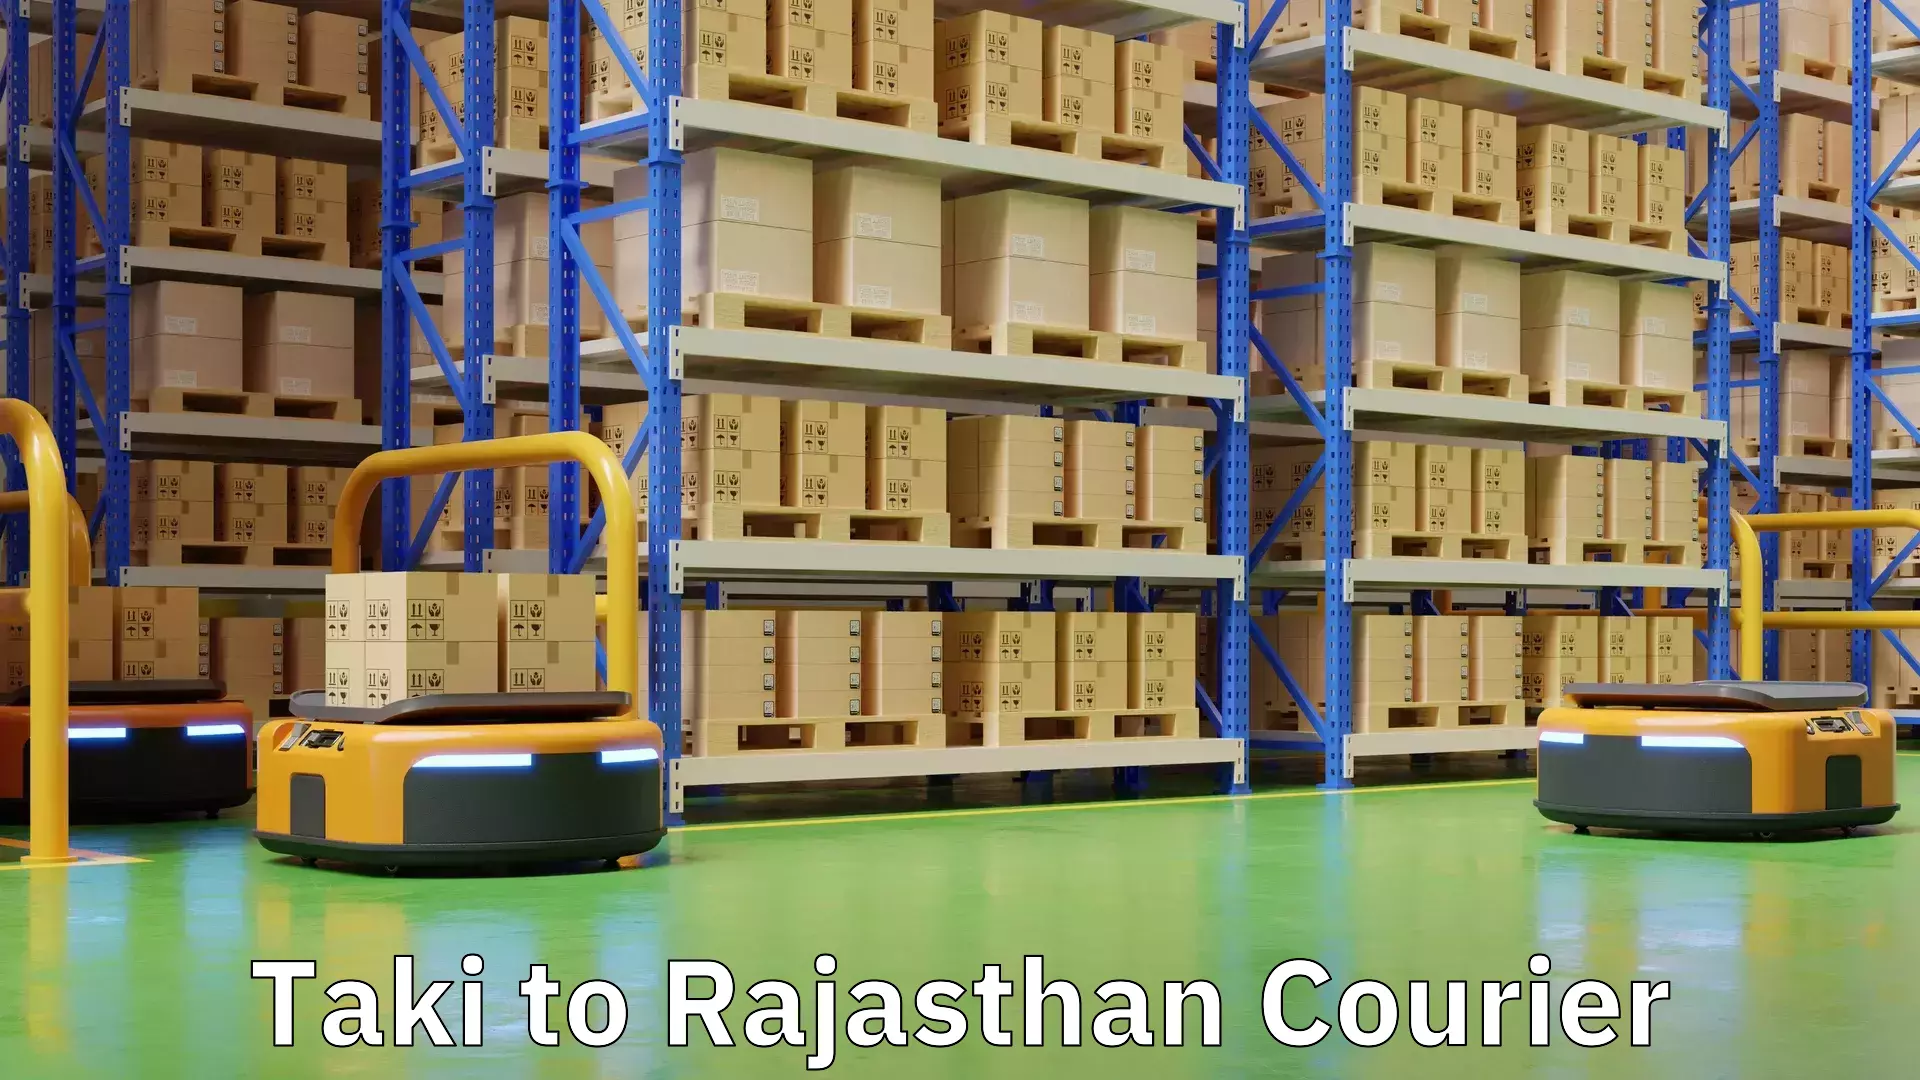 Round-the-clock parcel delivery in Taki to Rajasthan